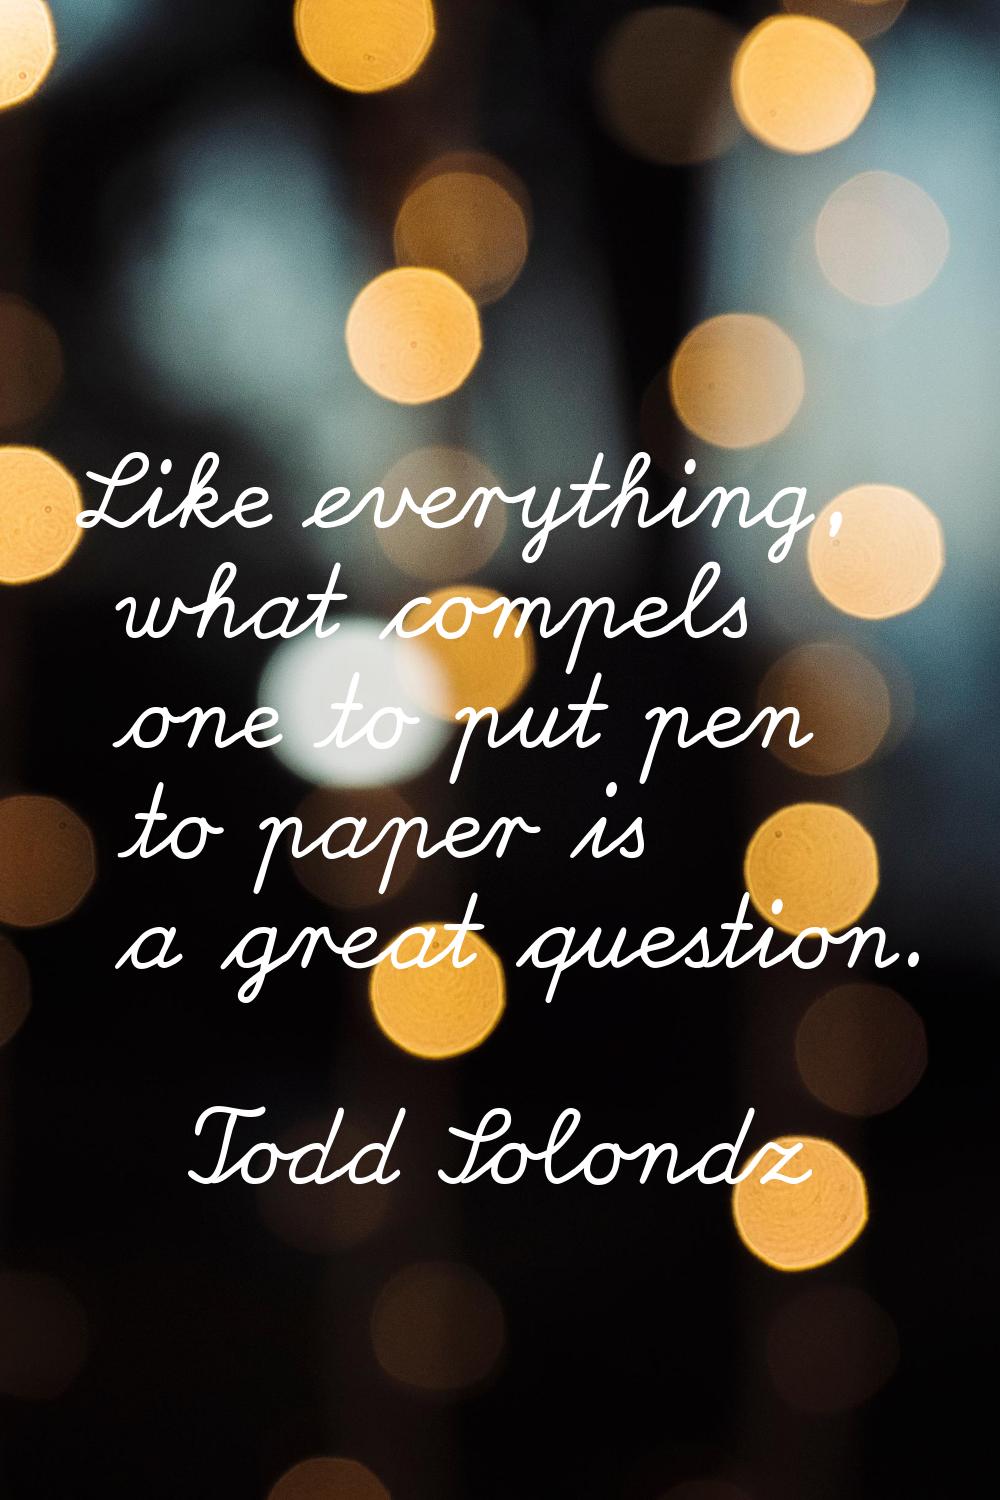 Like everything, what compels one to put pen to paper is a great question.